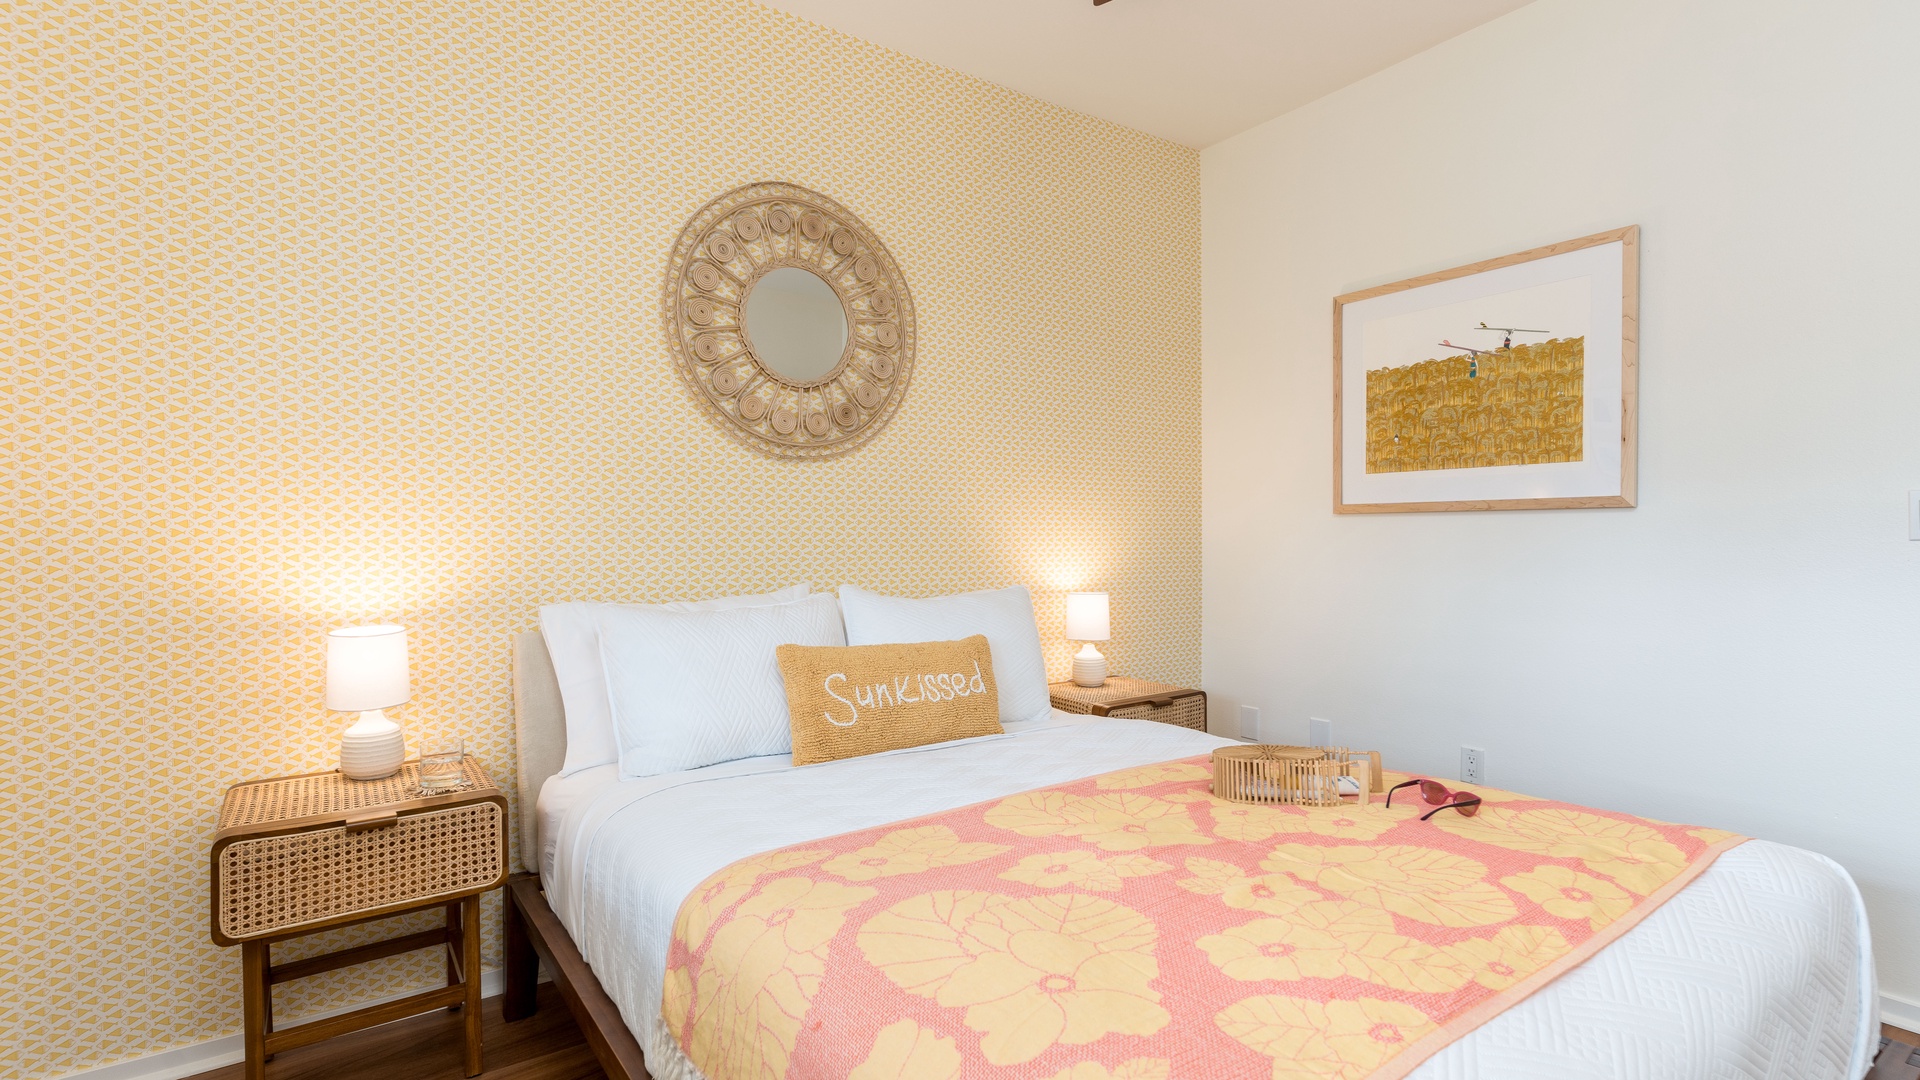 Kapolei Vacation Rentals, Coconut Plantation 1136-4 - The second guest bedroom features subtle island prints and delicate lighting.